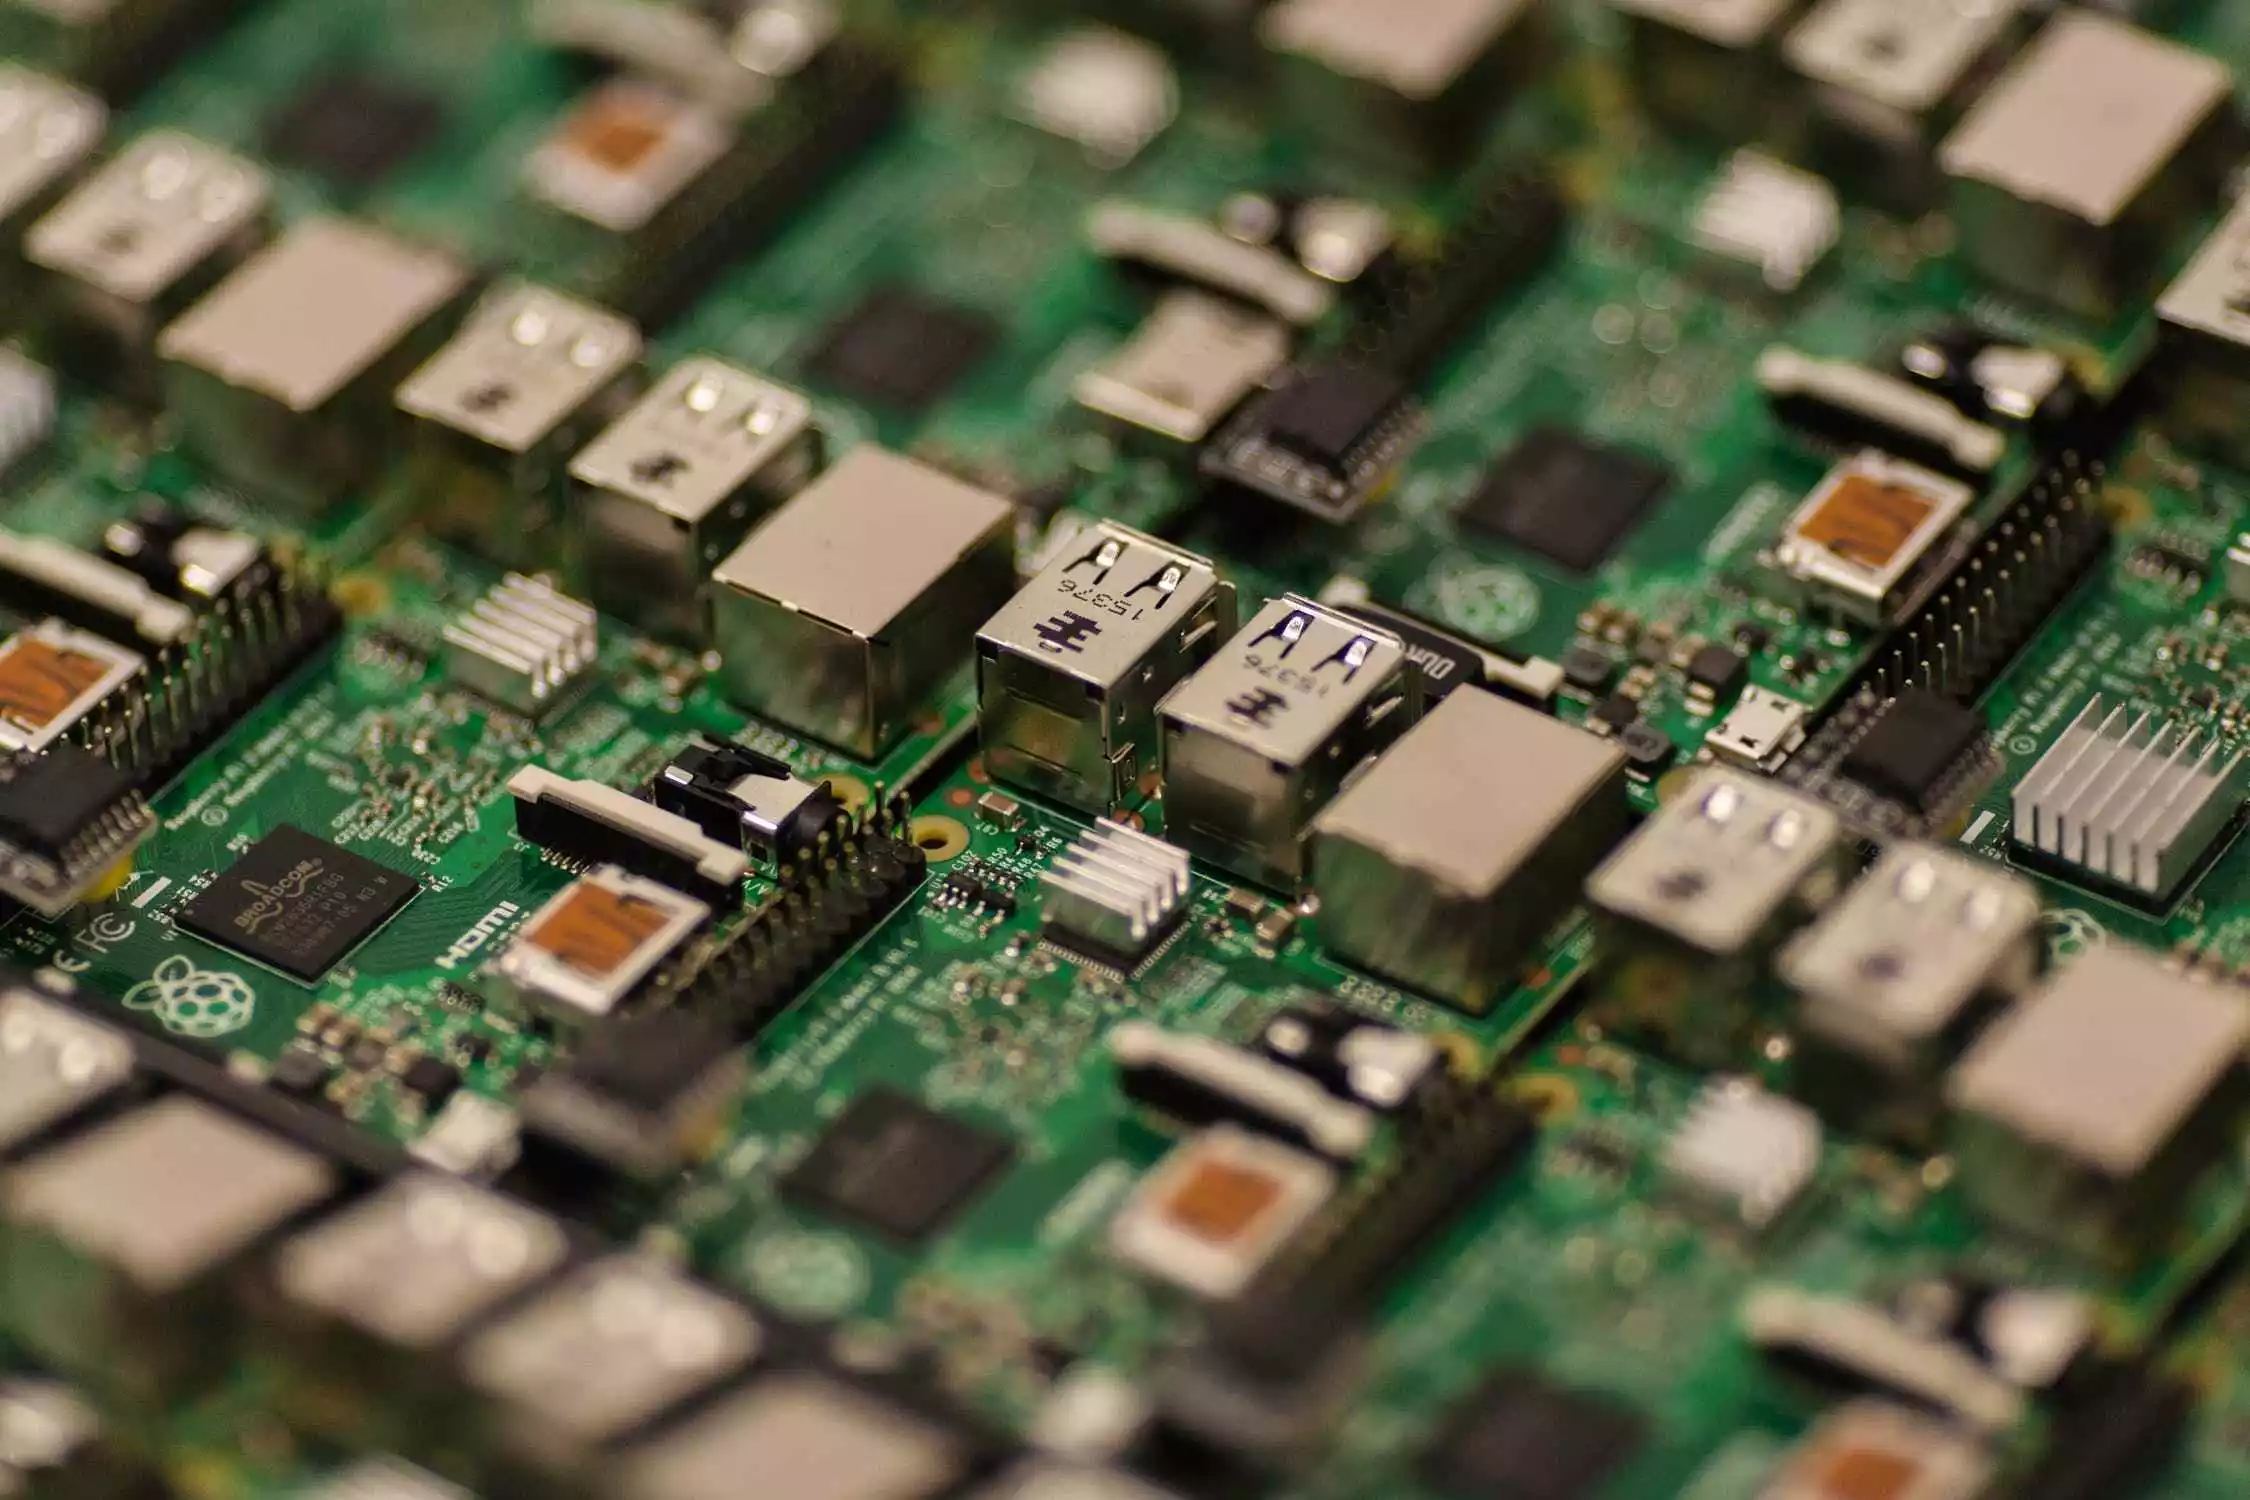 6 Very Important Things to Consider When Choosing a Raspberry Pi